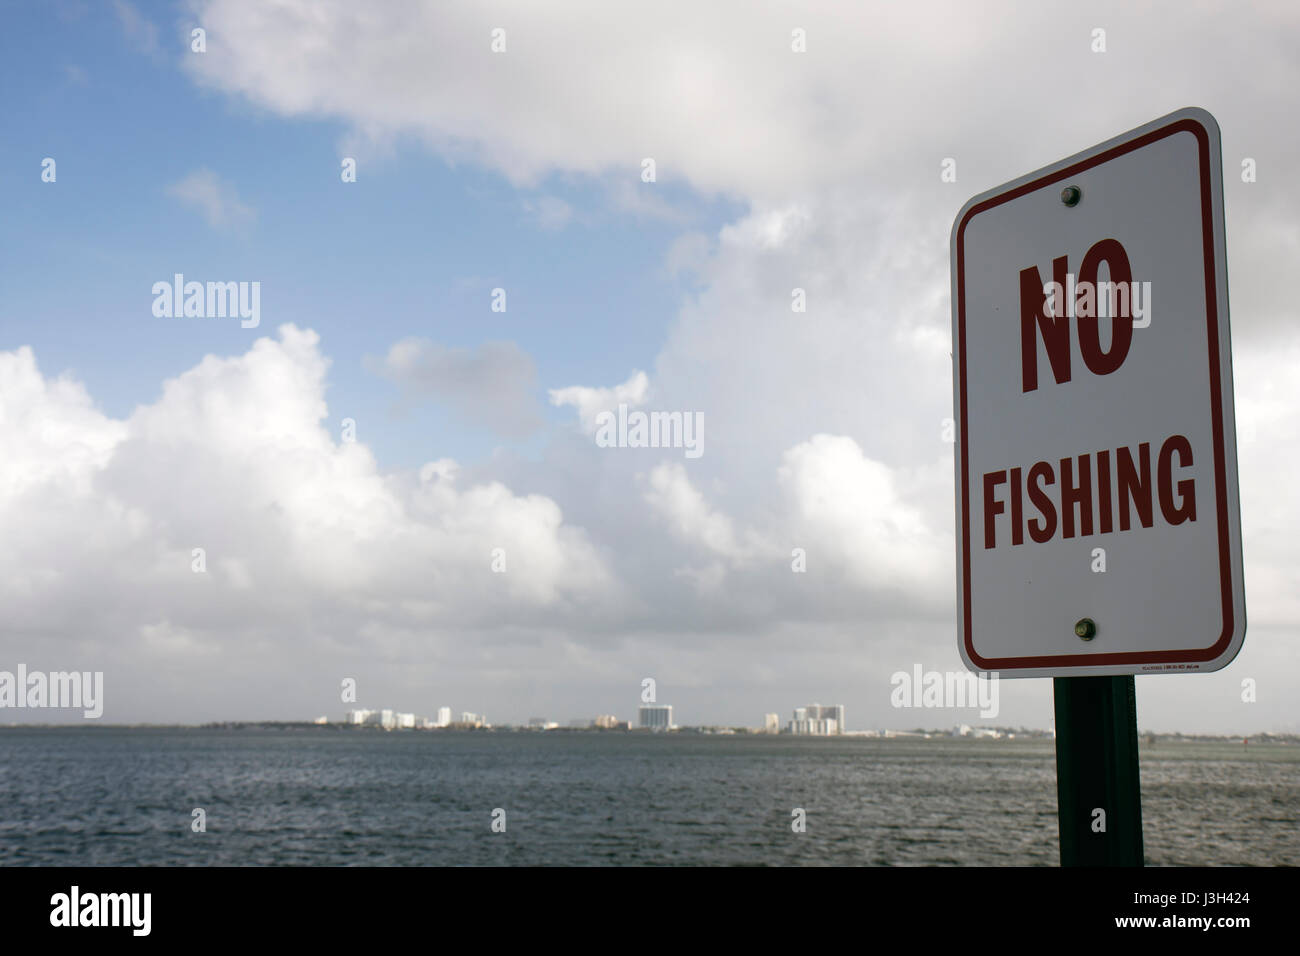 Miami Beach Florida,Biscayne Bay,sign,no fishing,information,regulation,water,sky,clouds,clouds,FL080911079 Stock Photo